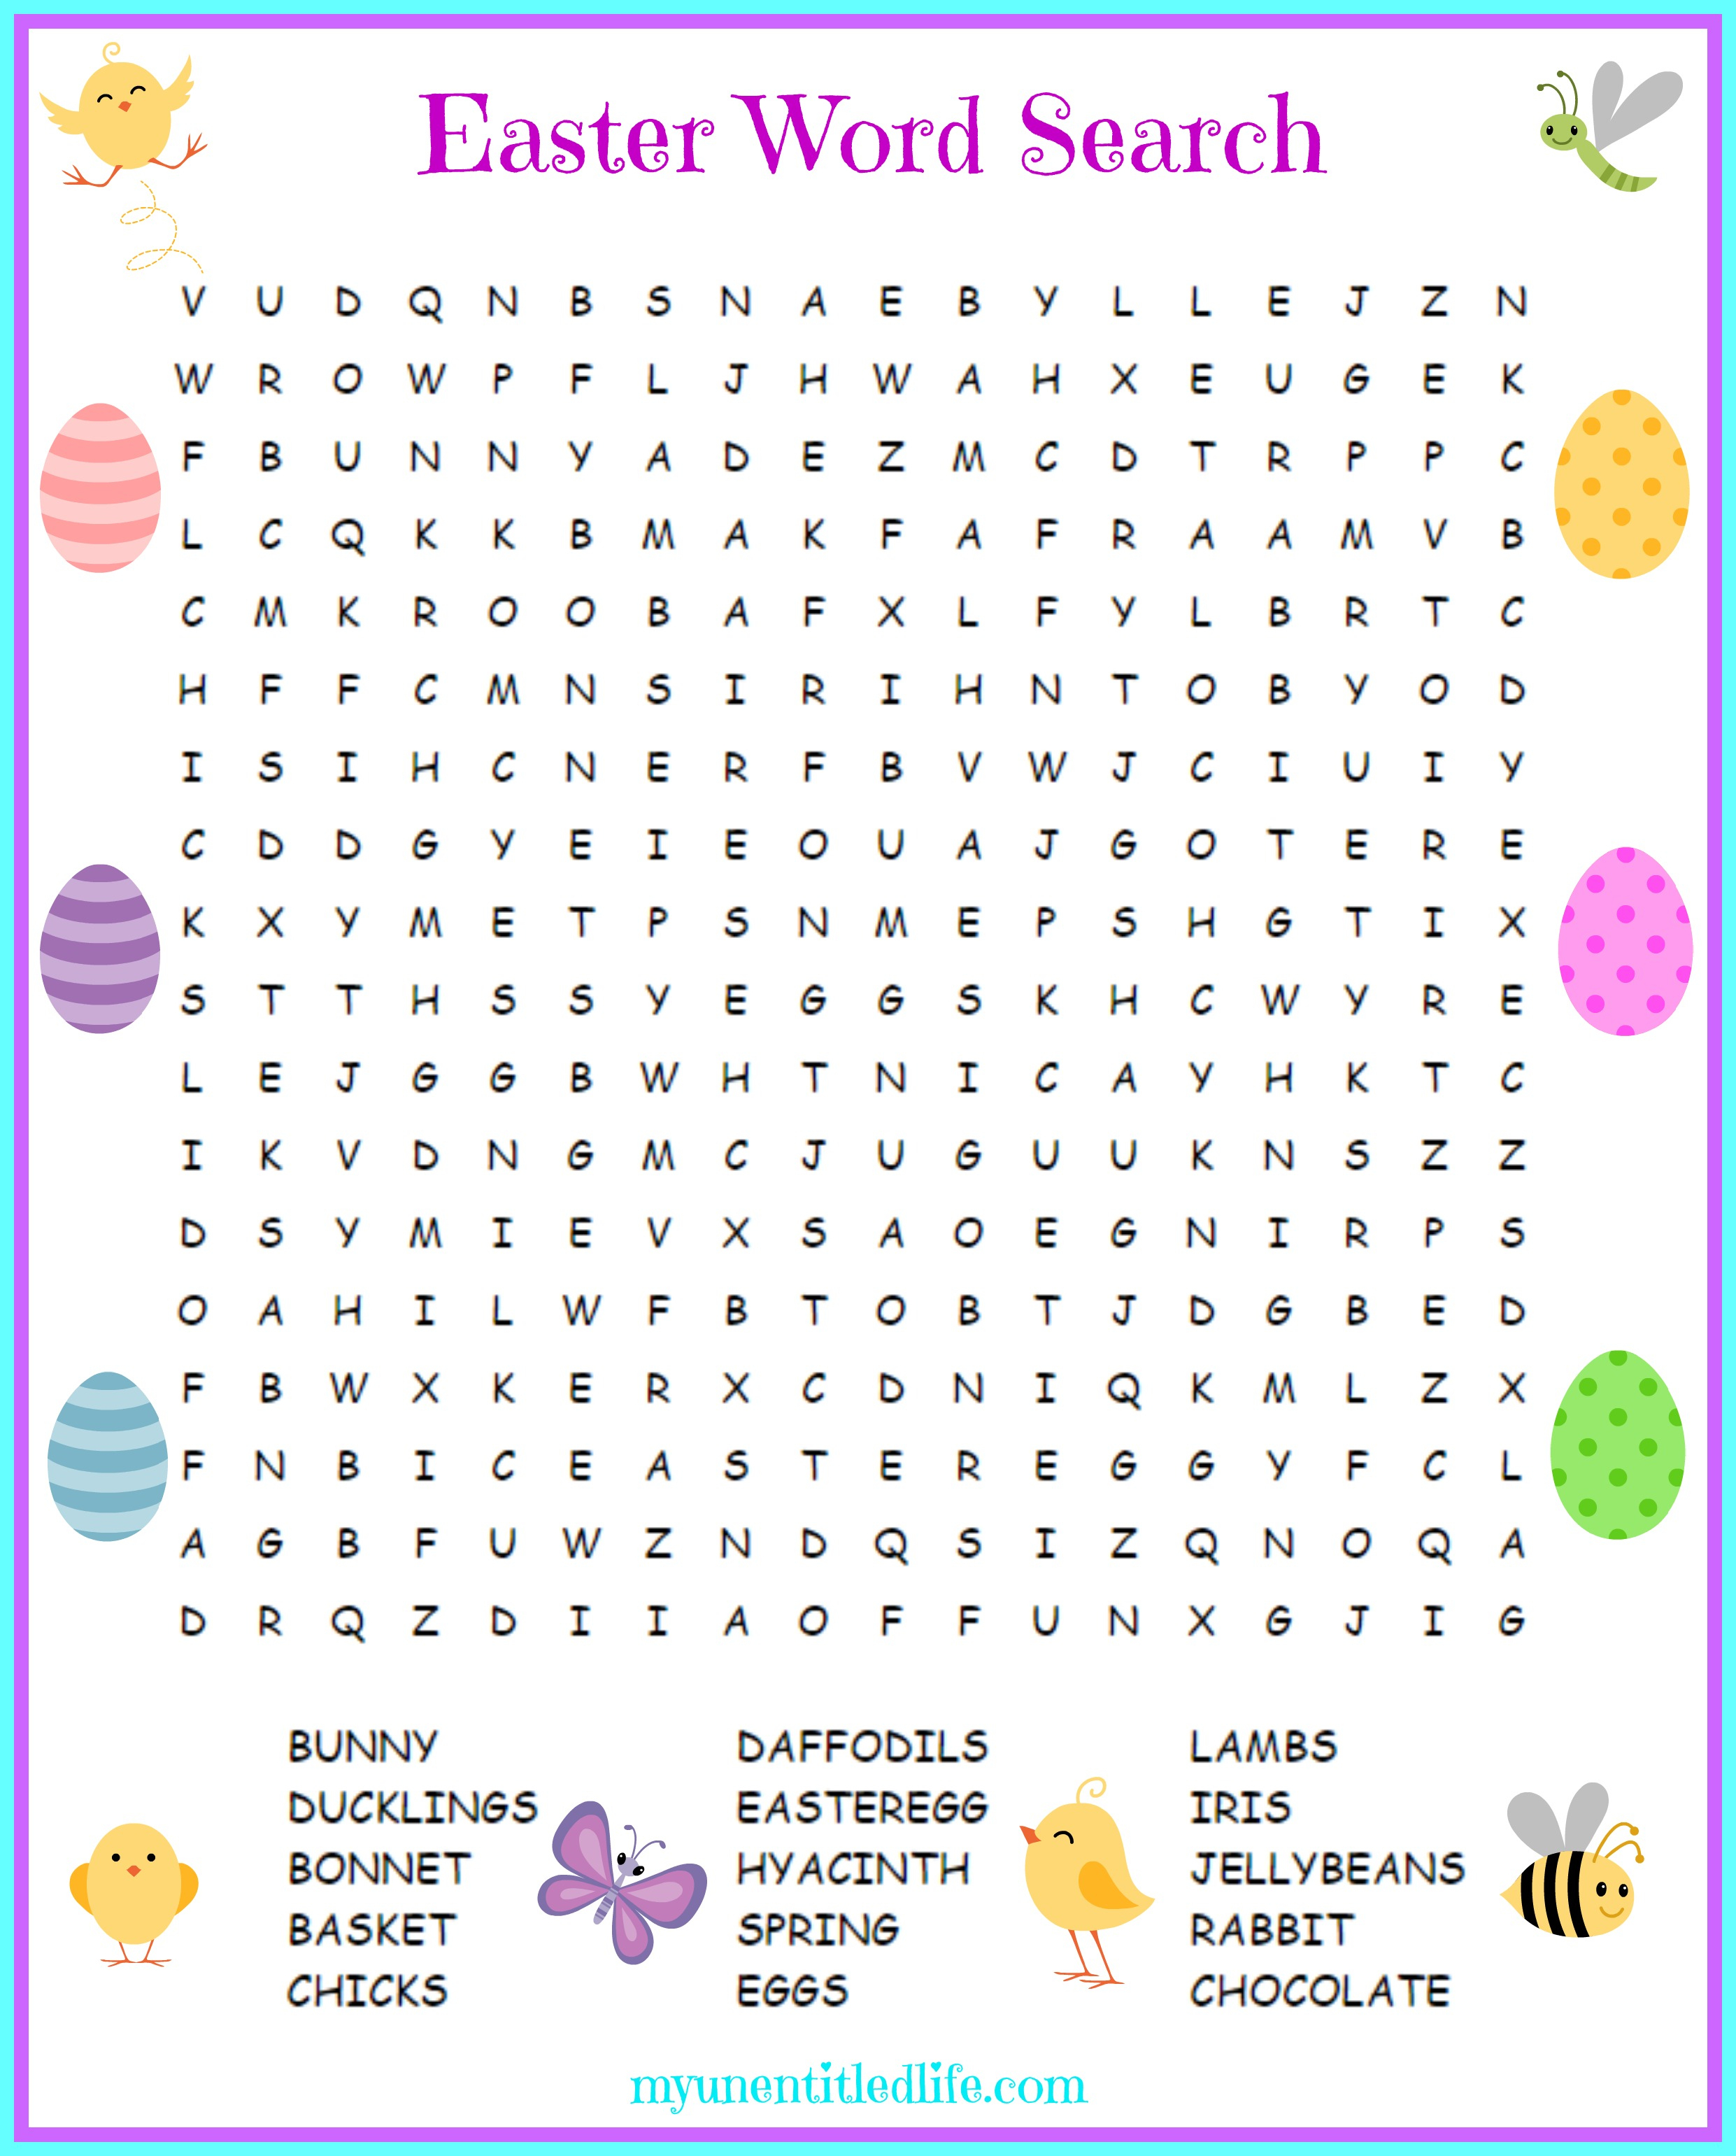 Easter Puzzles Printable – Hd Easter Images - Printable Easter Puzzles For Adults